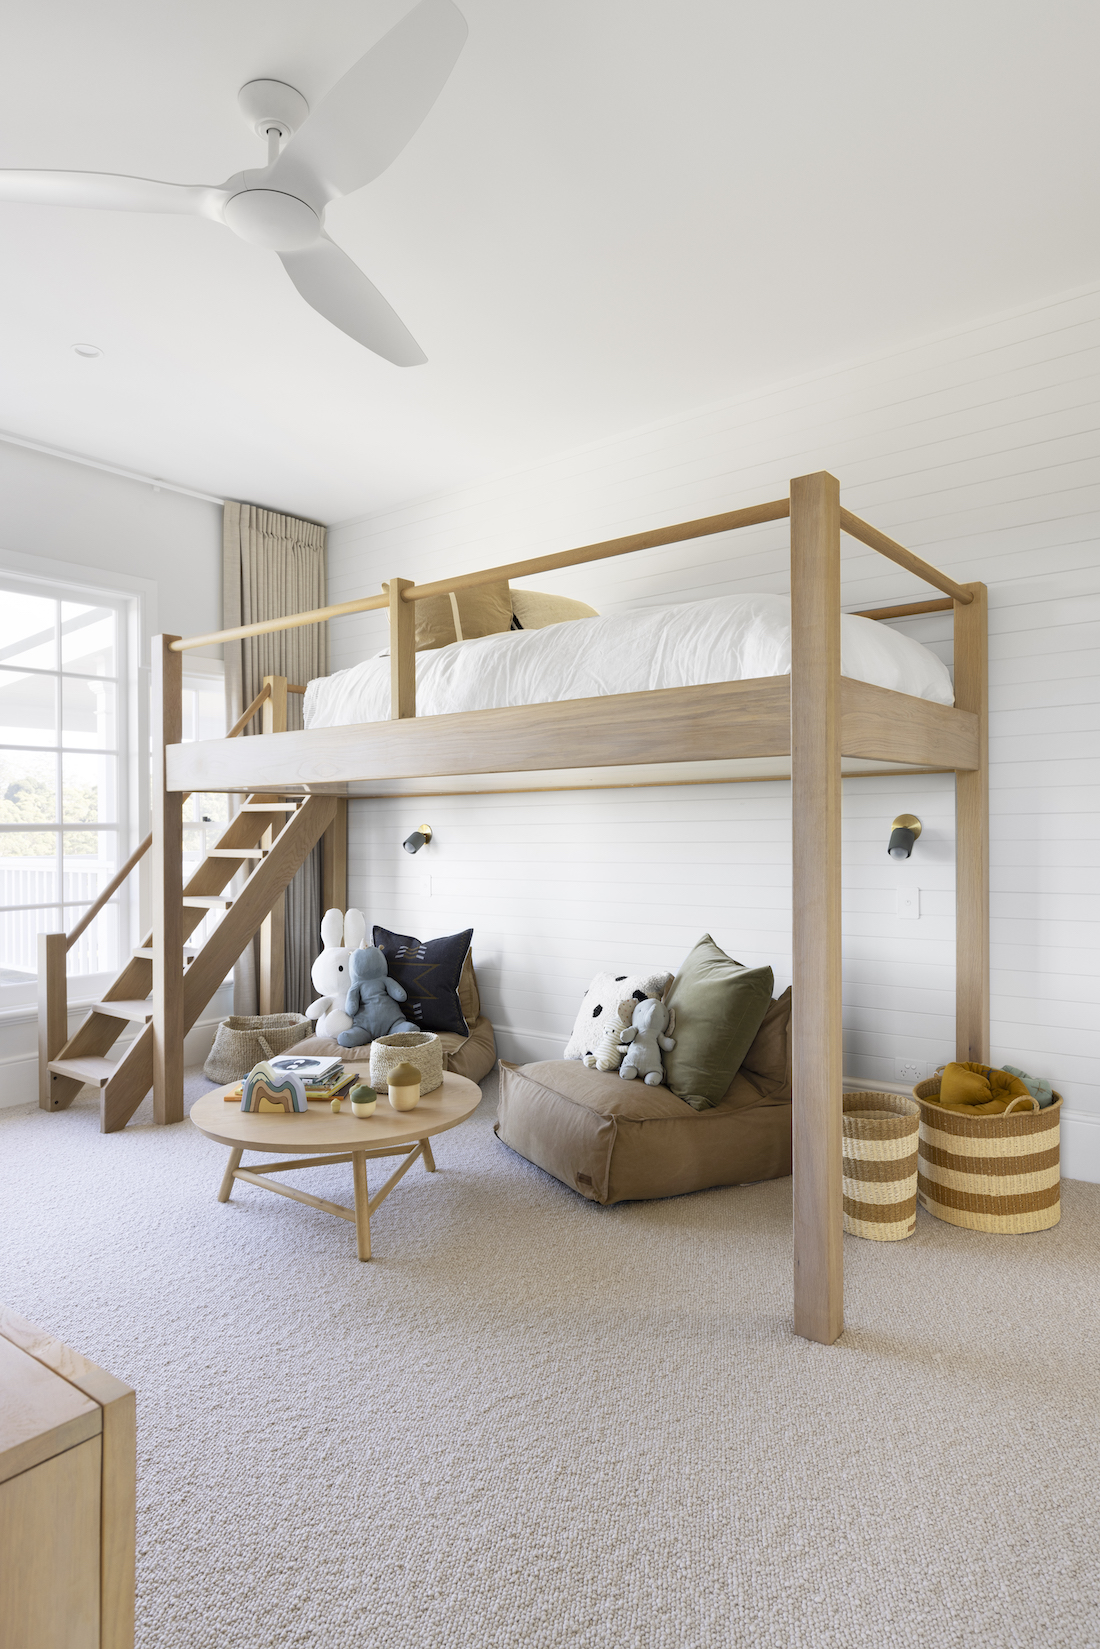 Kids bedroom with timber bunk bed